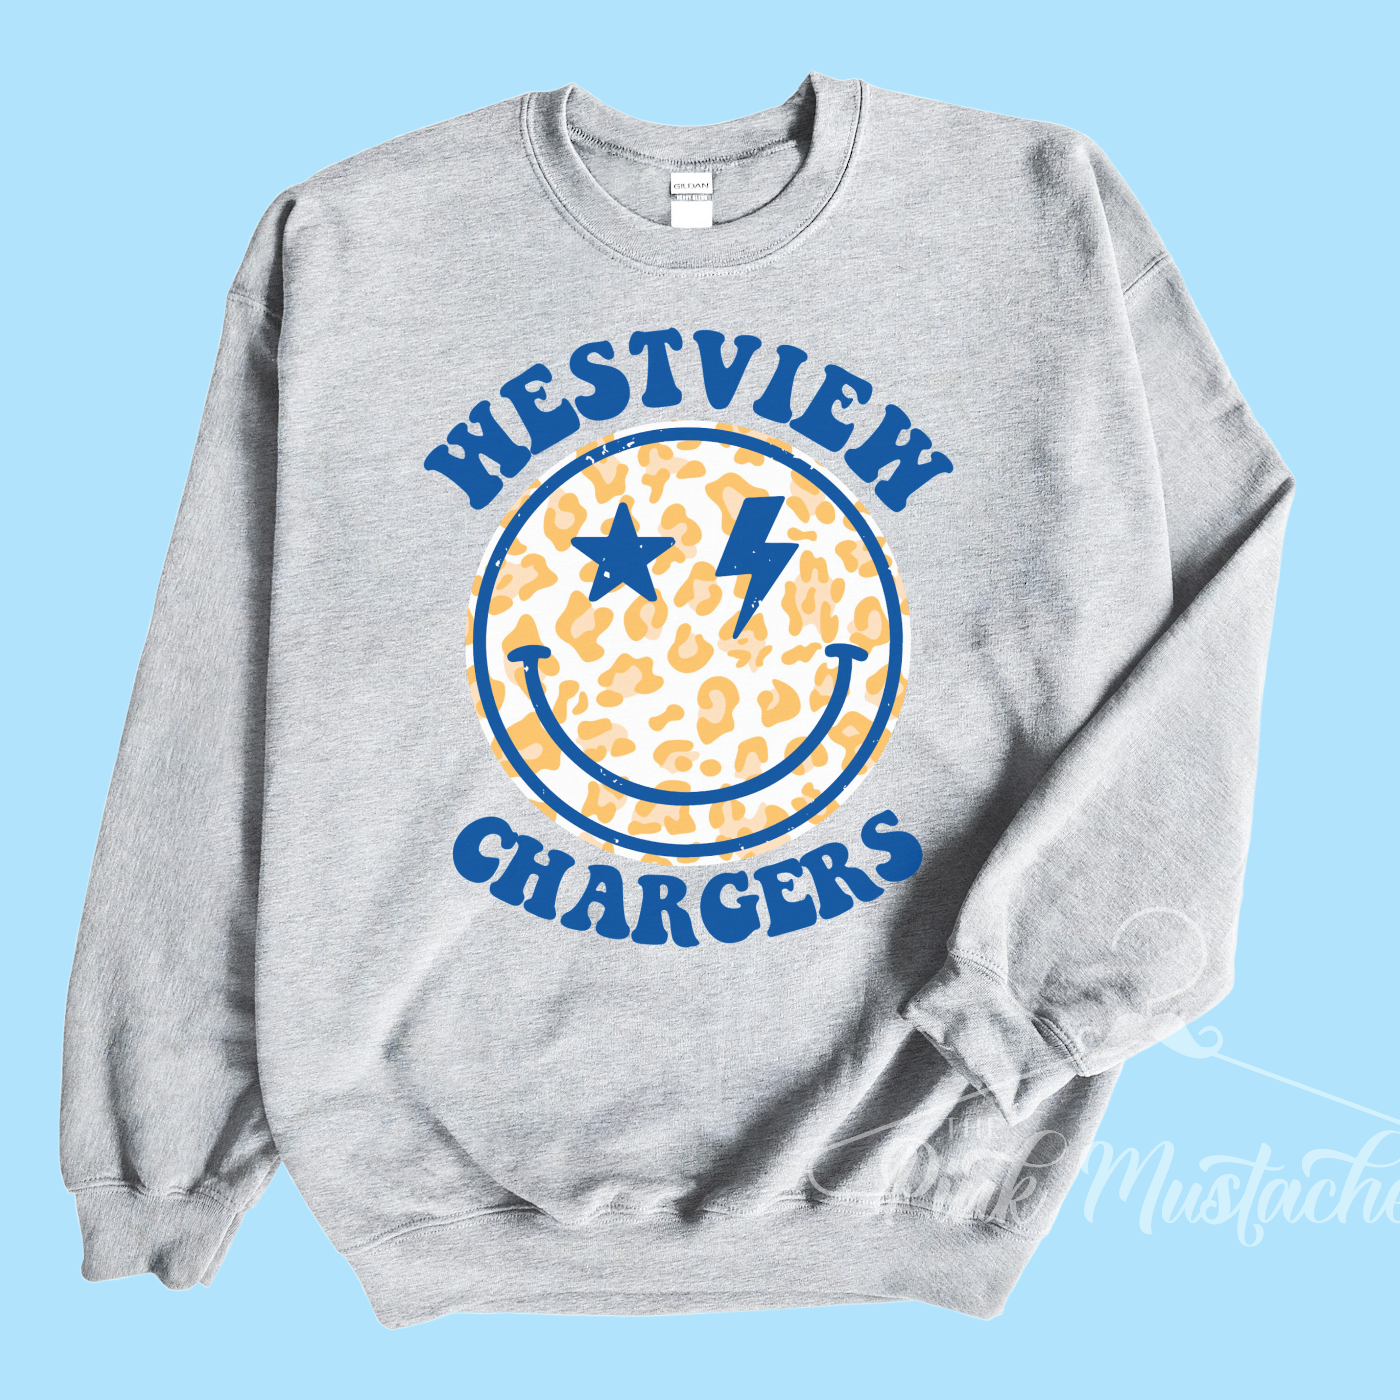 Westview Chargers Distressed Smiley Unisex Sweatshirt / Toddler, Youth, and Adult Sizes